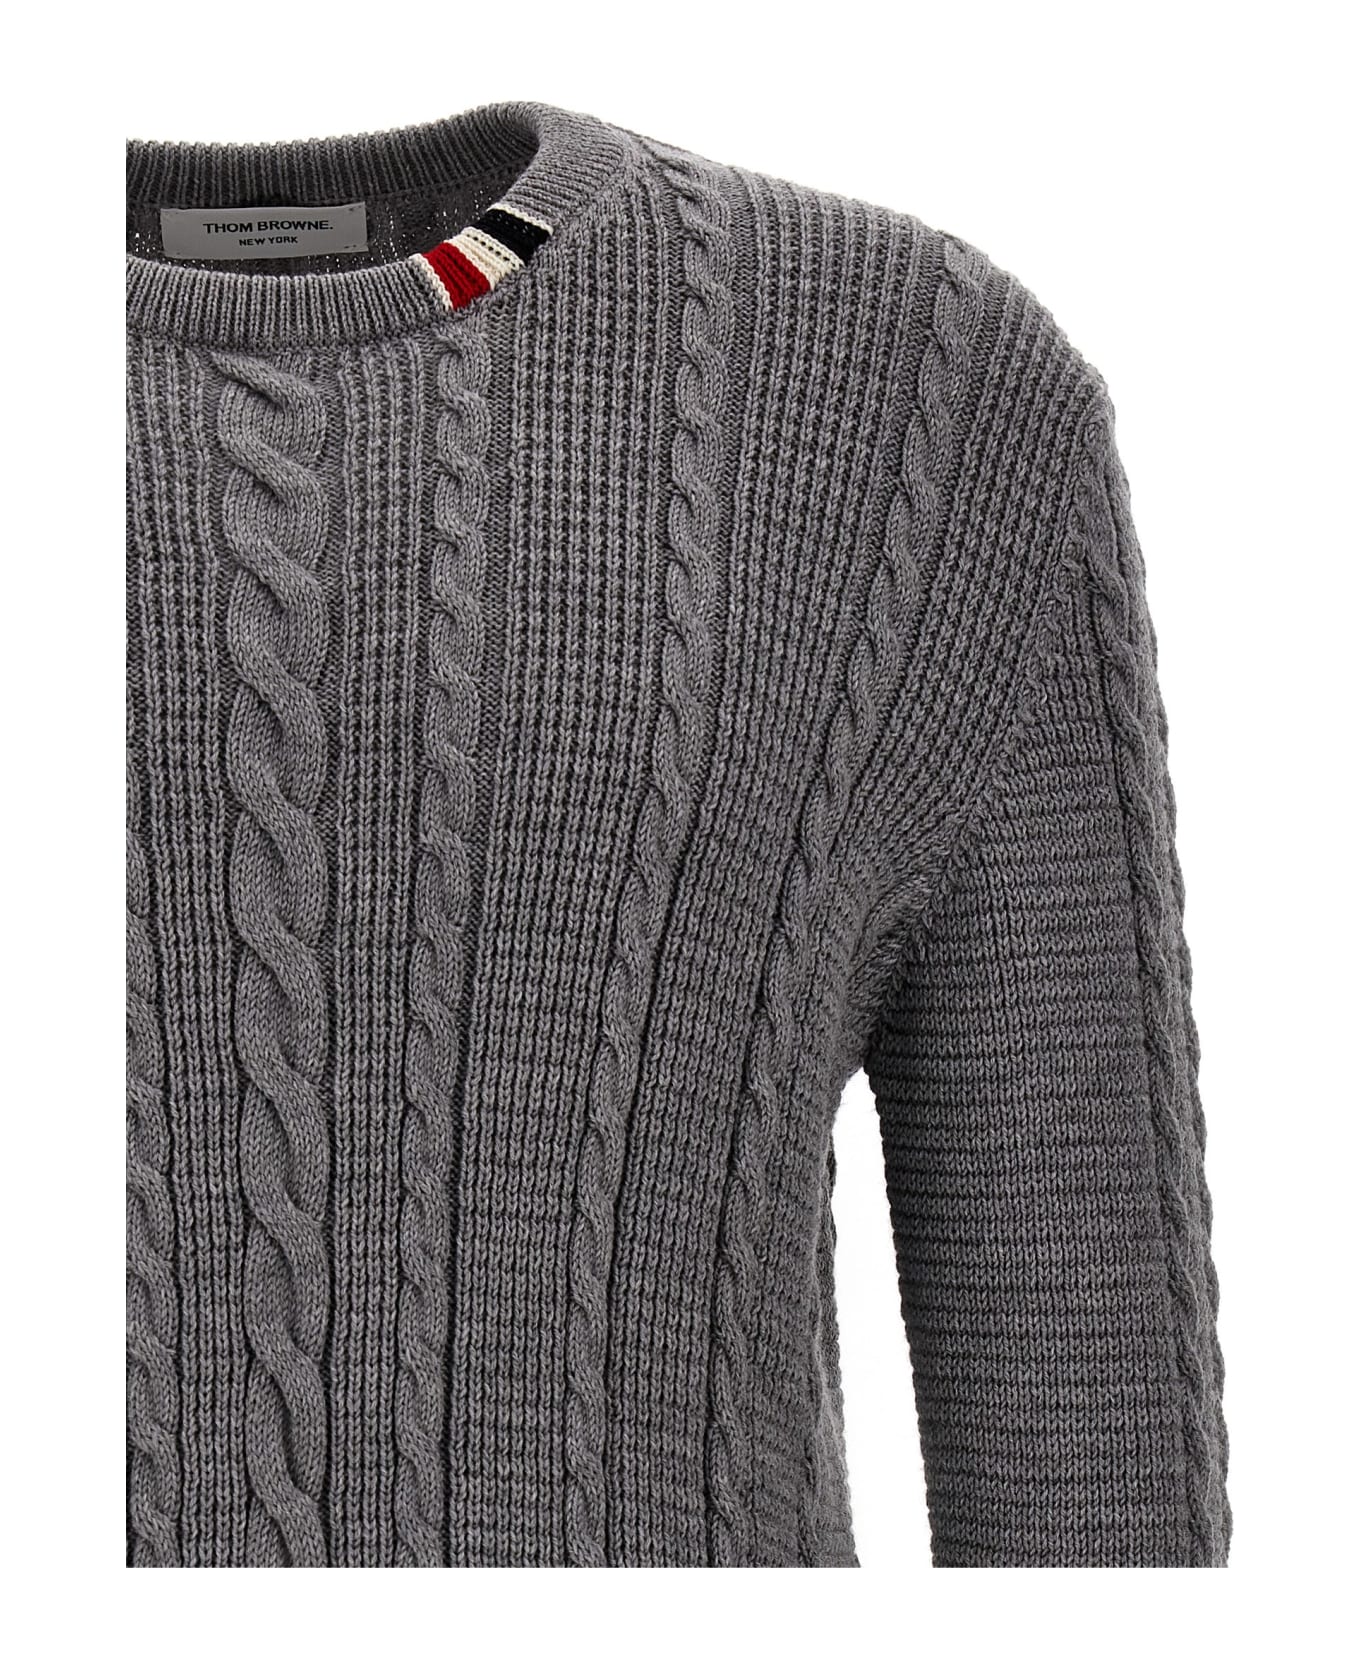 Thom Browne 'cable' Sweater - Gray